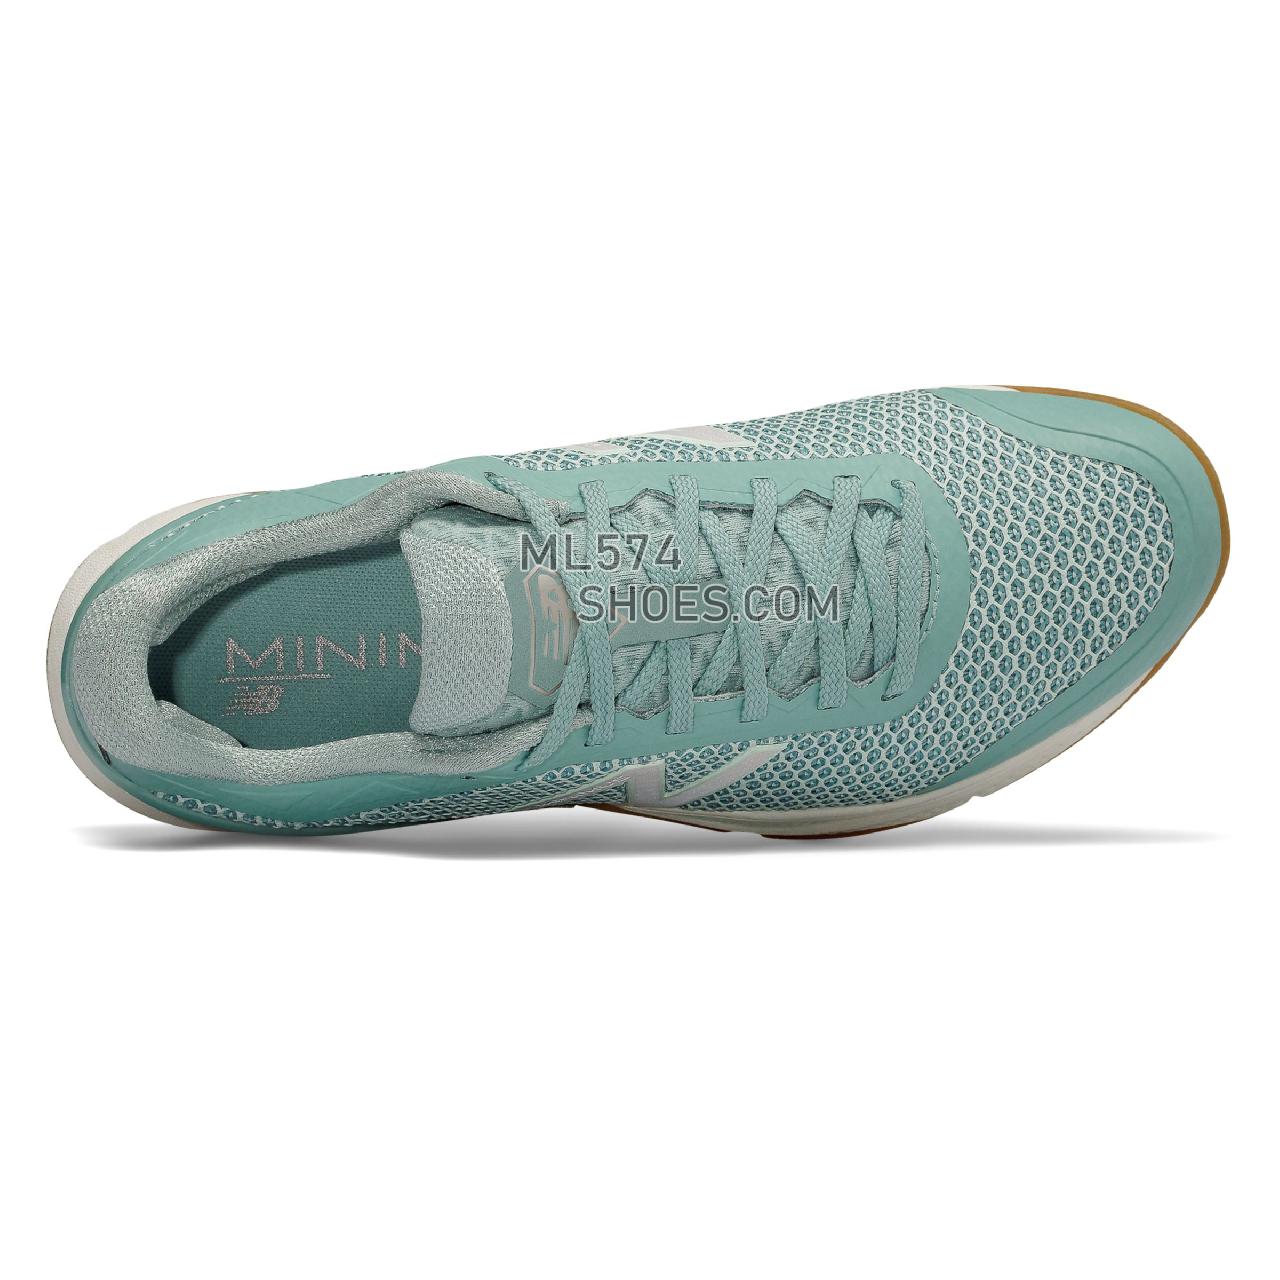 New Balance Minimus 40 Trainer - Women's 40 - X-training Ocean Air with Mineral Sage - WX40SS1